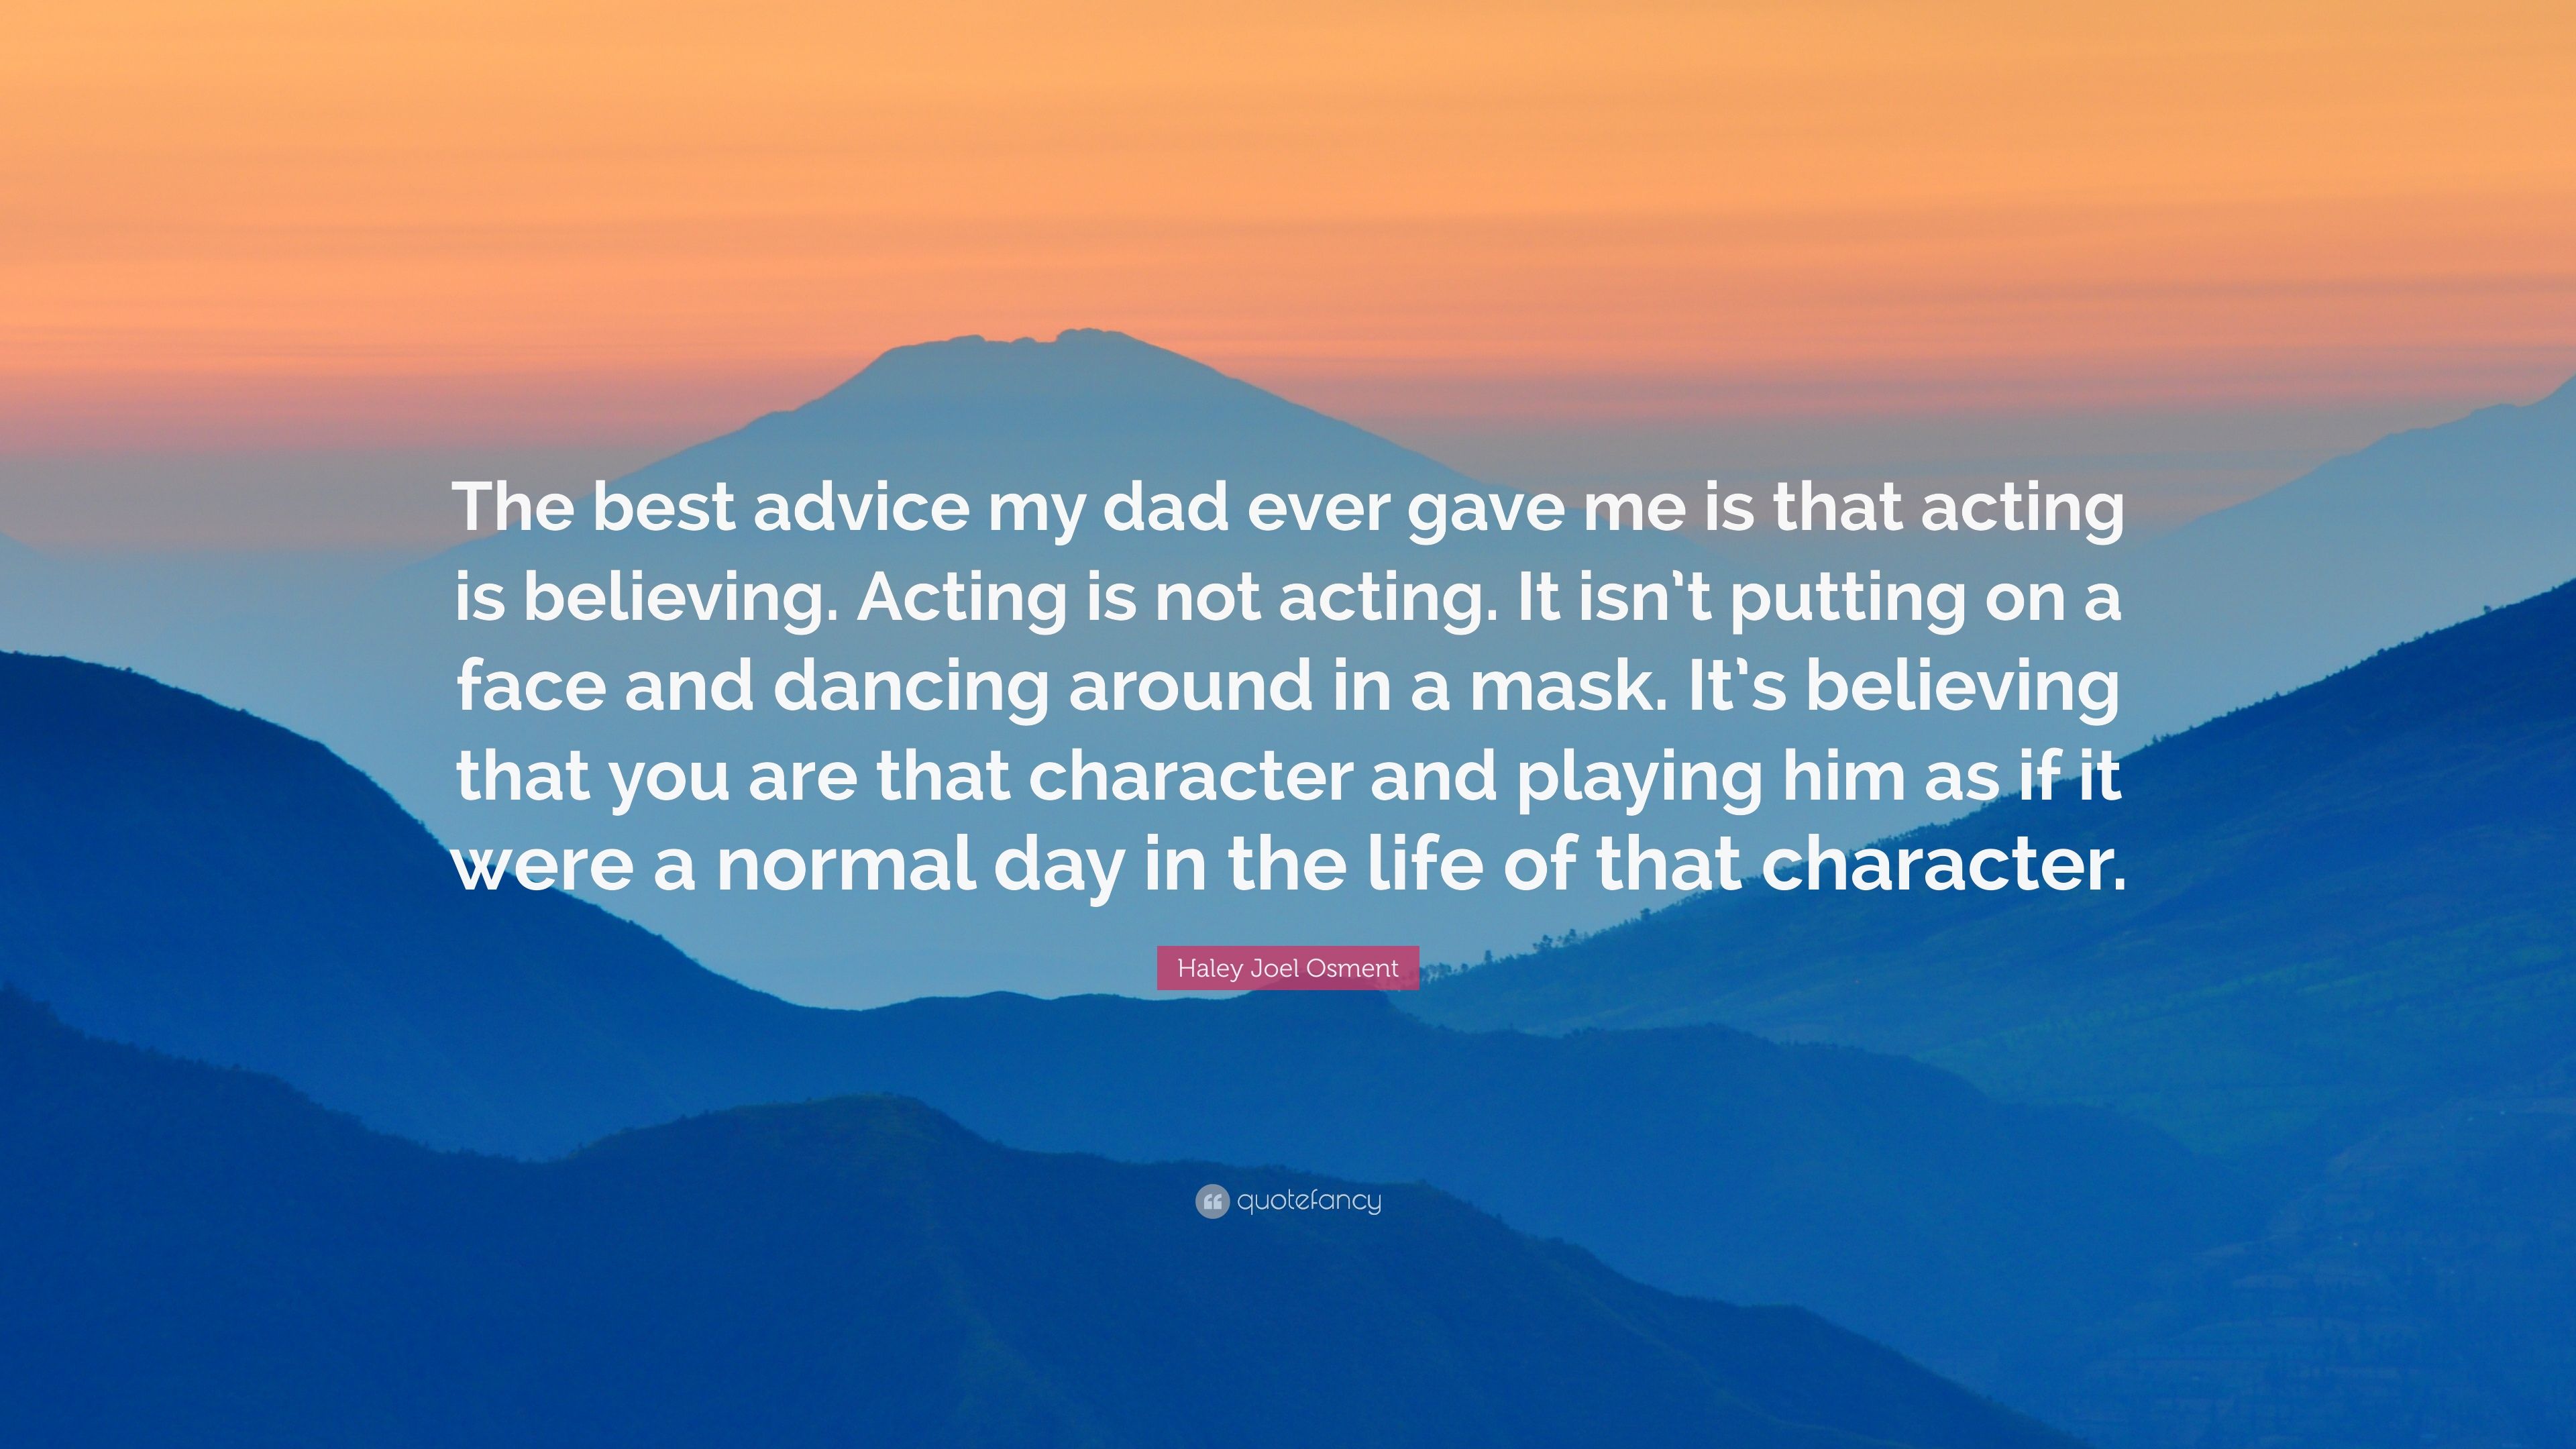 Haley Joel Osment Quote: “The best advice my dad ever gave me is